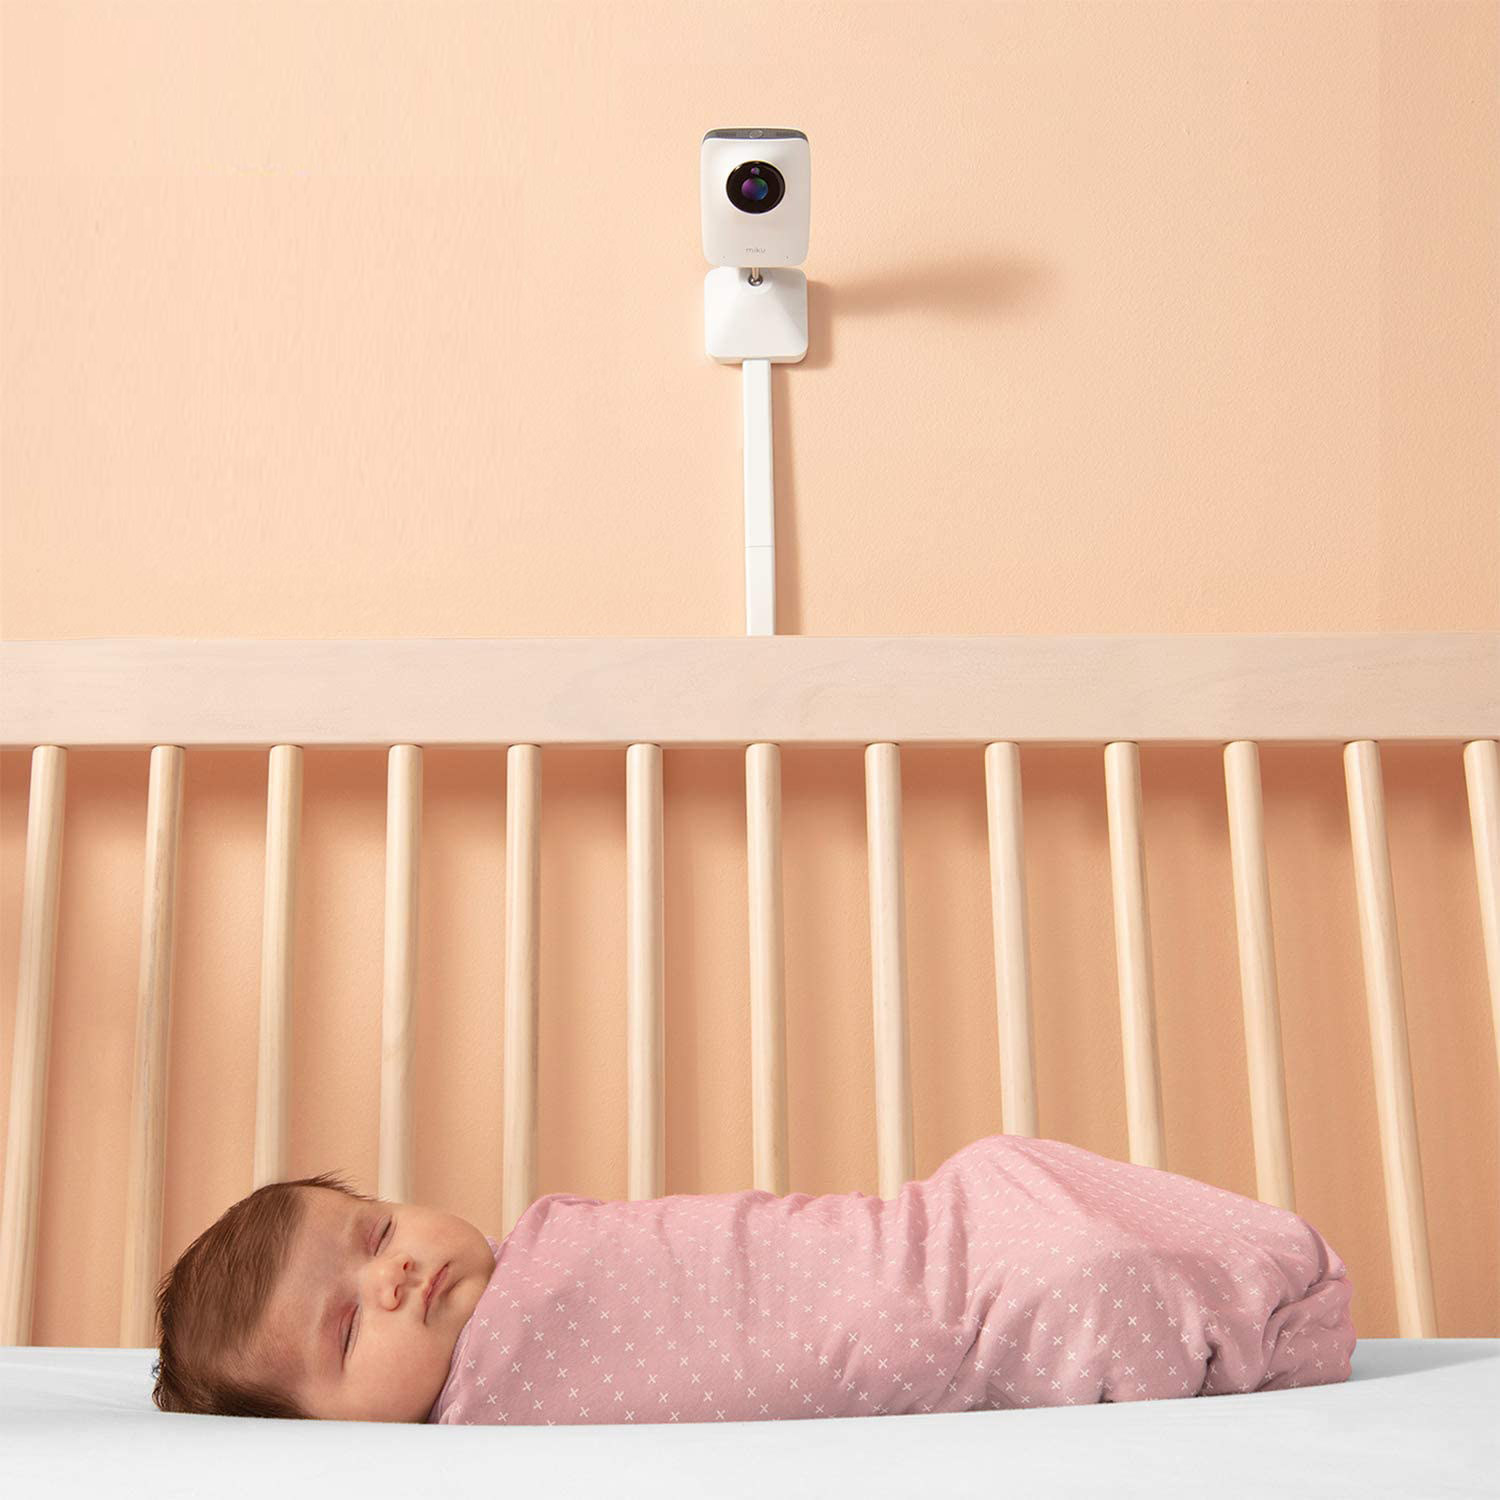 A baby sleeping in a crib with a camera on the wall beside the crib